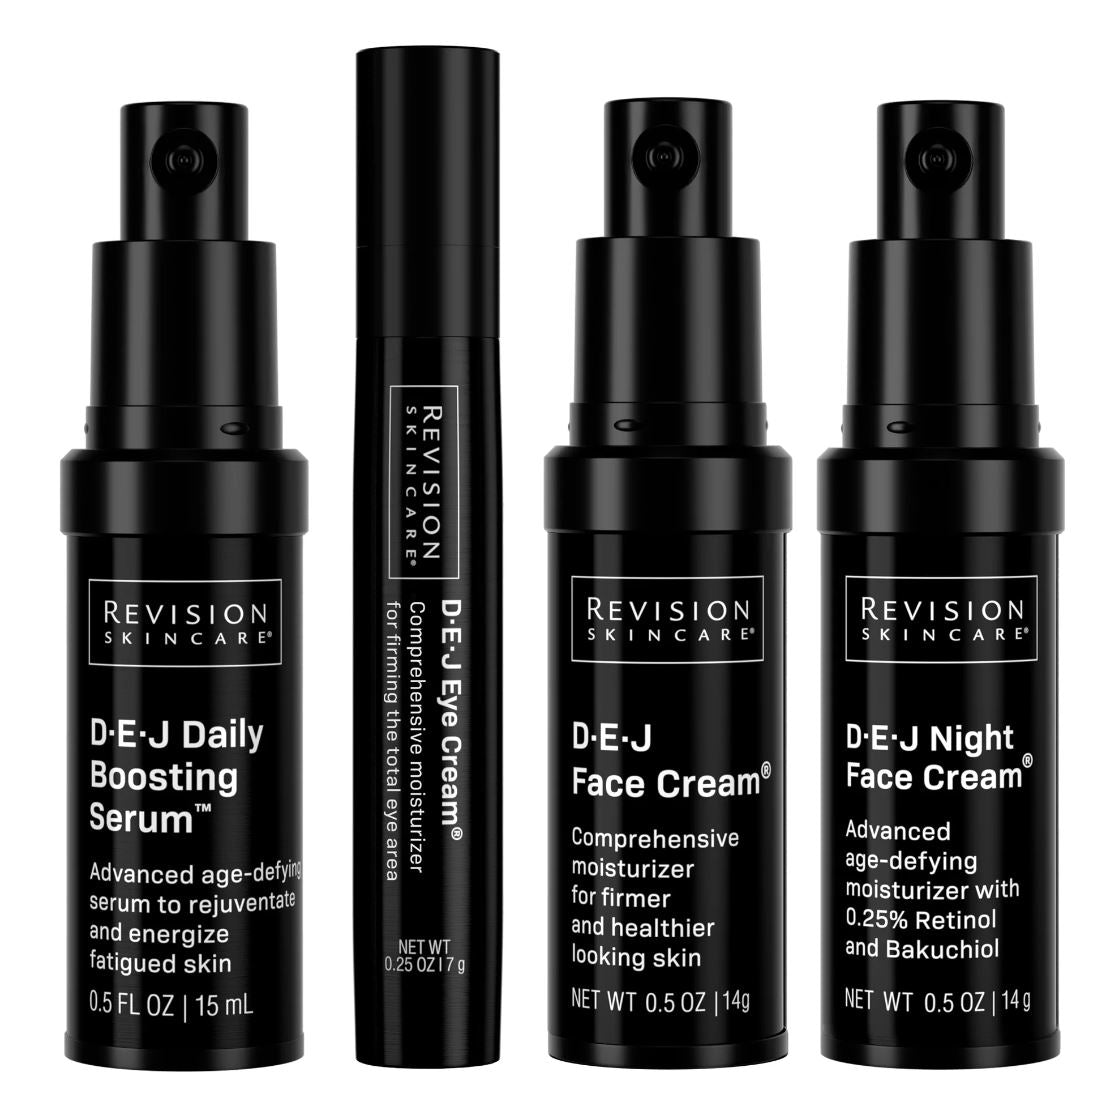 Revision Skincare D.E.J Age-Defying Trial Regimen + Cosmetic Black Bag ($340 Value) Revision Shop at Exclusive Beauty Club